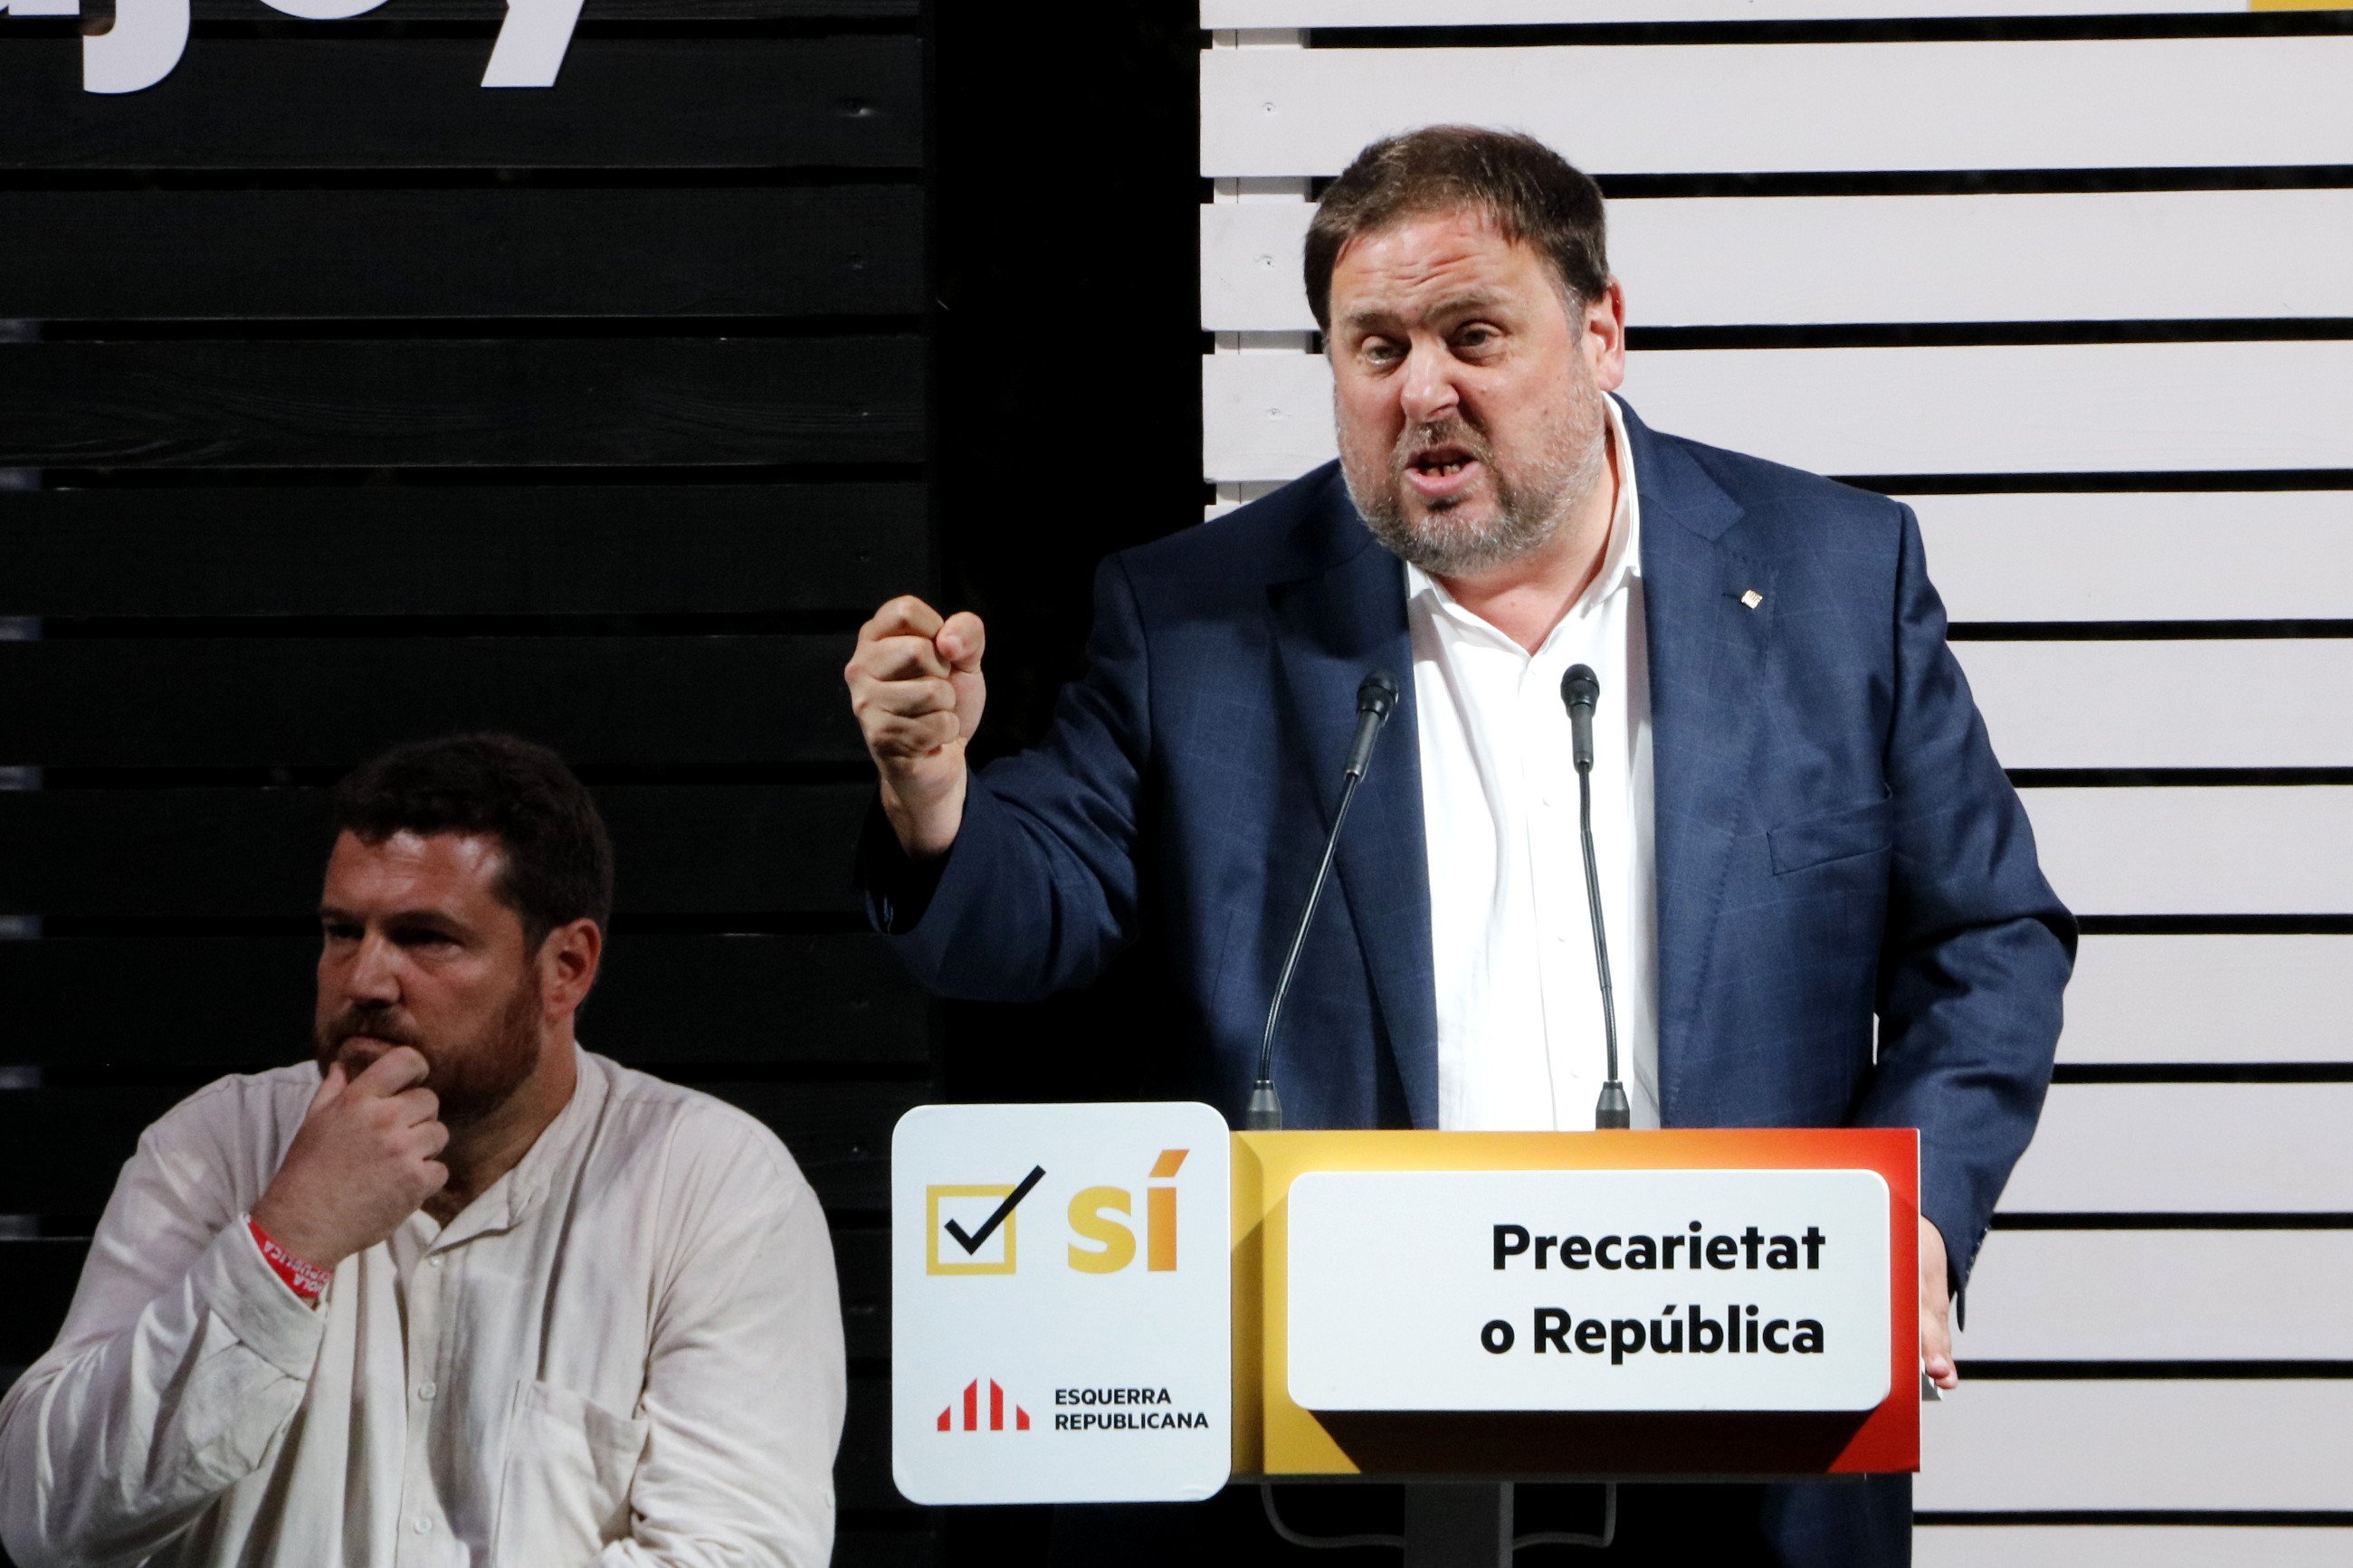 Junqueras to the judge: "Defending and promoting independence is fully legal"